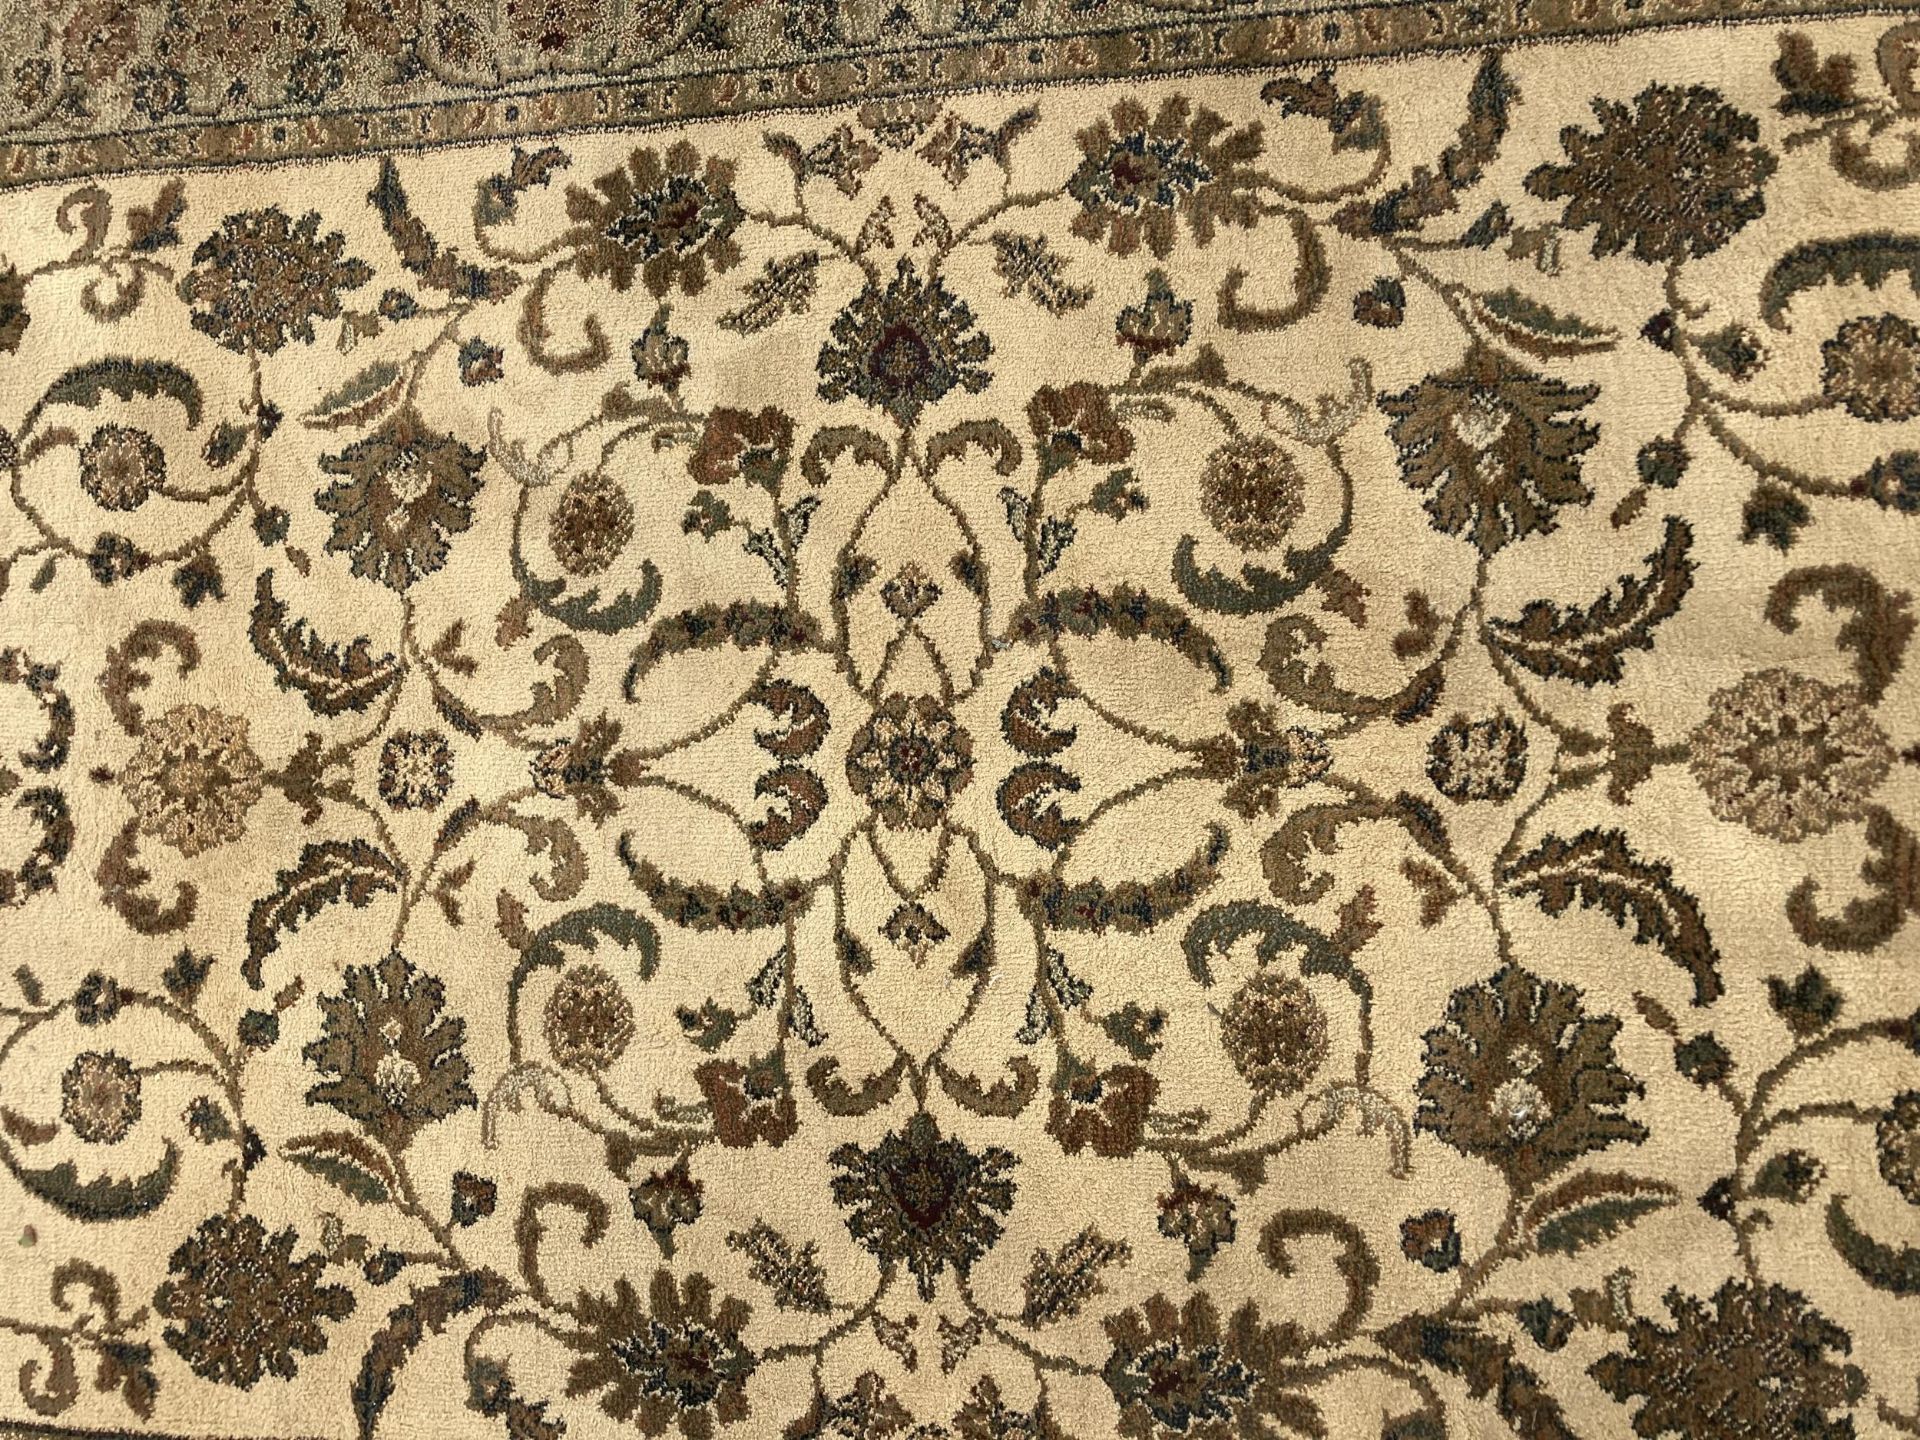 A BROWN PATTERNED FRINGED RUG - Image 3 of 3